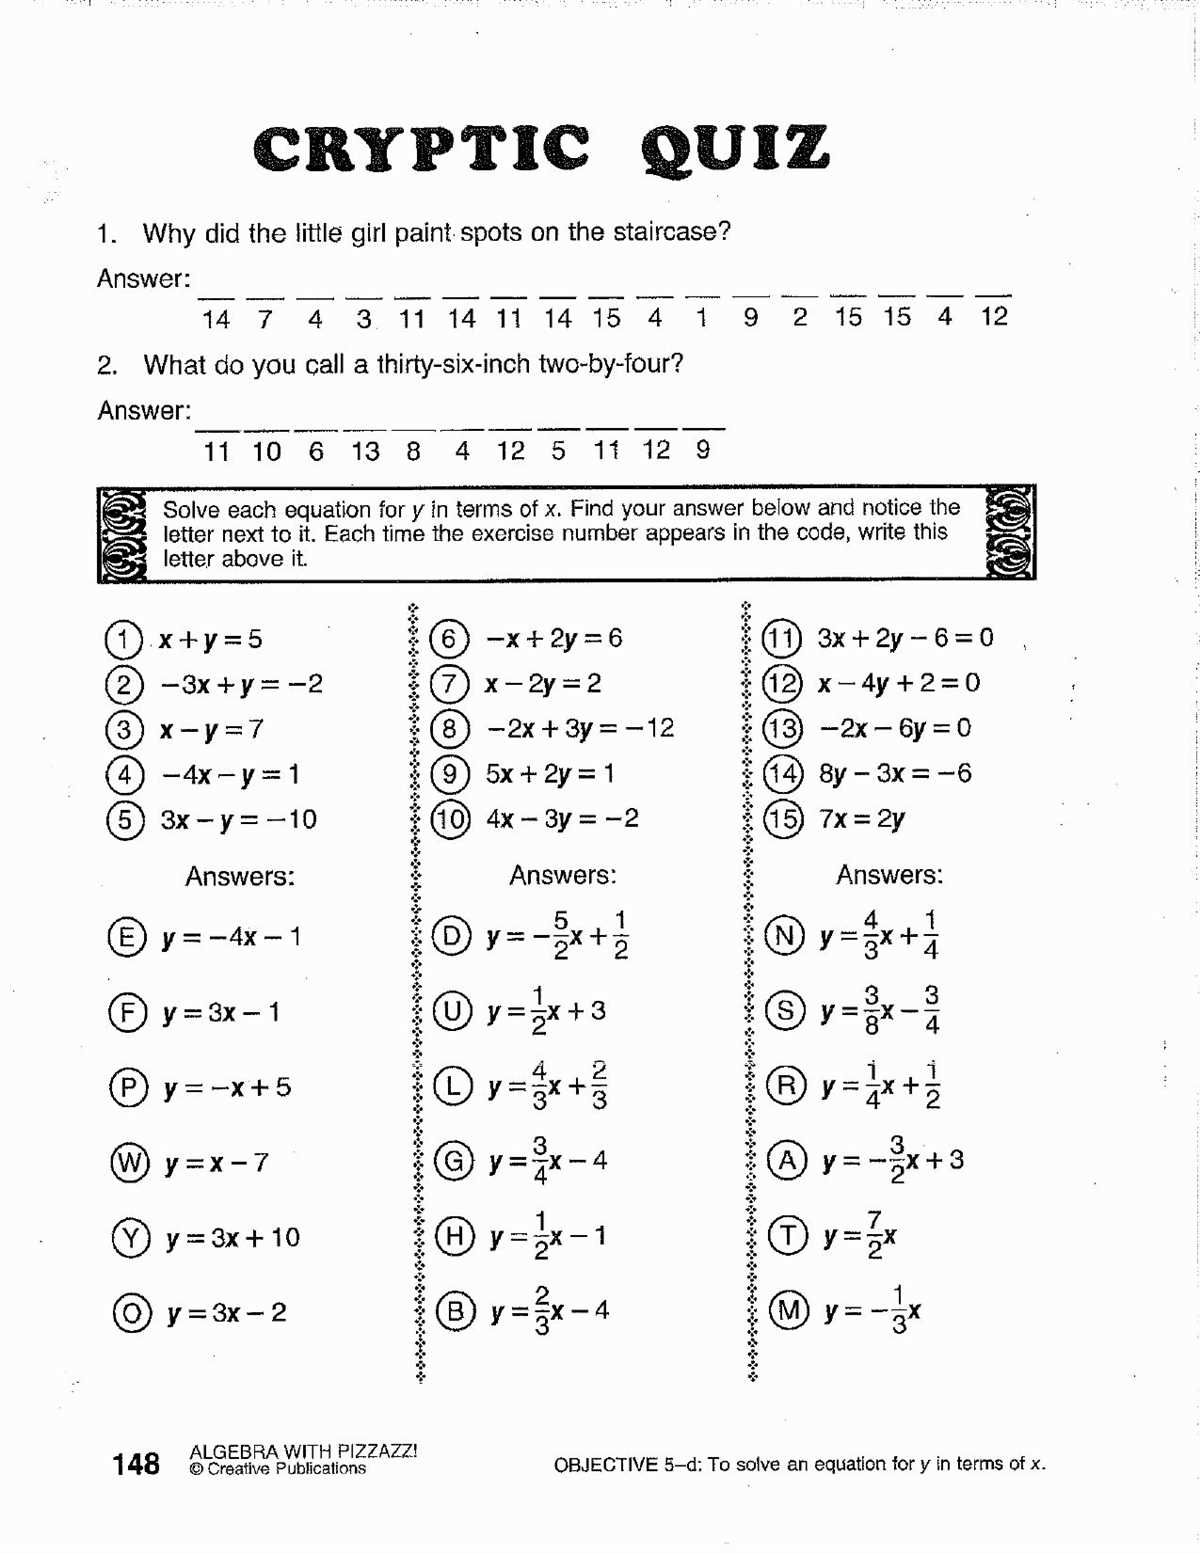 Solving Algebraic Equations with Pizzazz Answer Page 150